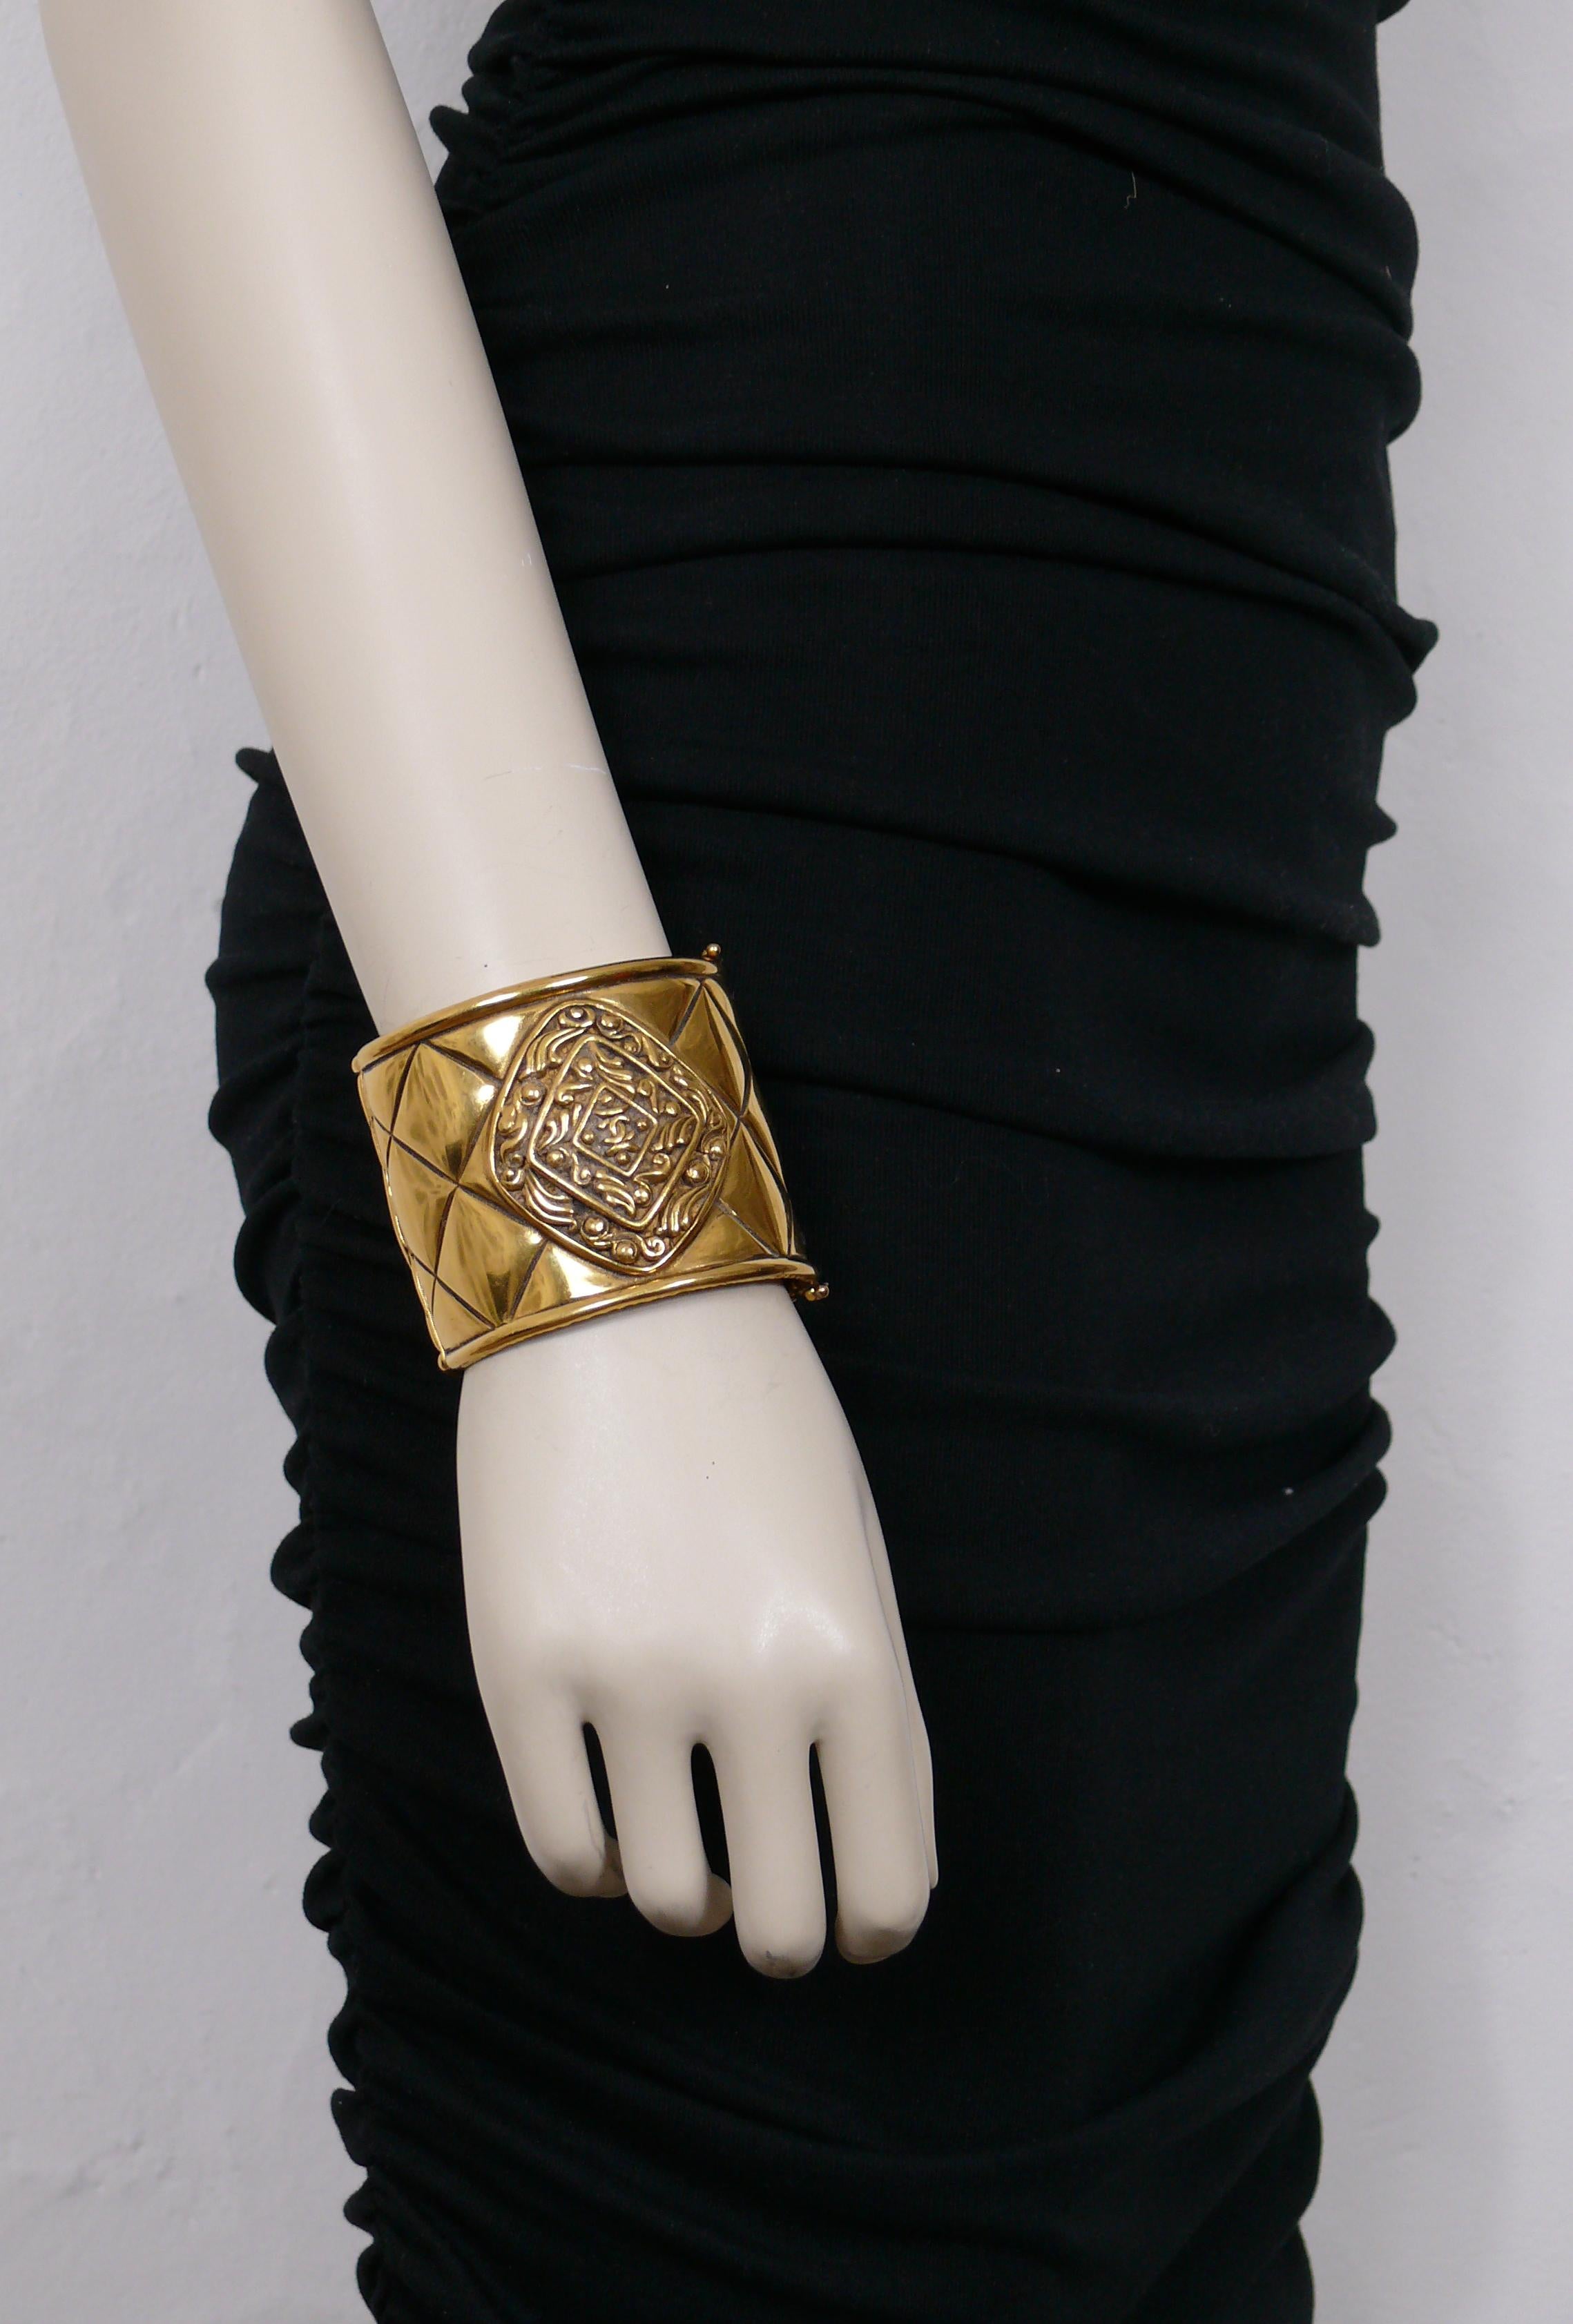 CHANEL vintage antiqued gold toned clamper cuff bracelet featuring an iconic quilted design and a CC logo surrounded by scrolls in a diamond shaped medallion.

Double secure clasp closure.

Embossed CHANEL MADE IN FRANCE.

Indicative measurements :